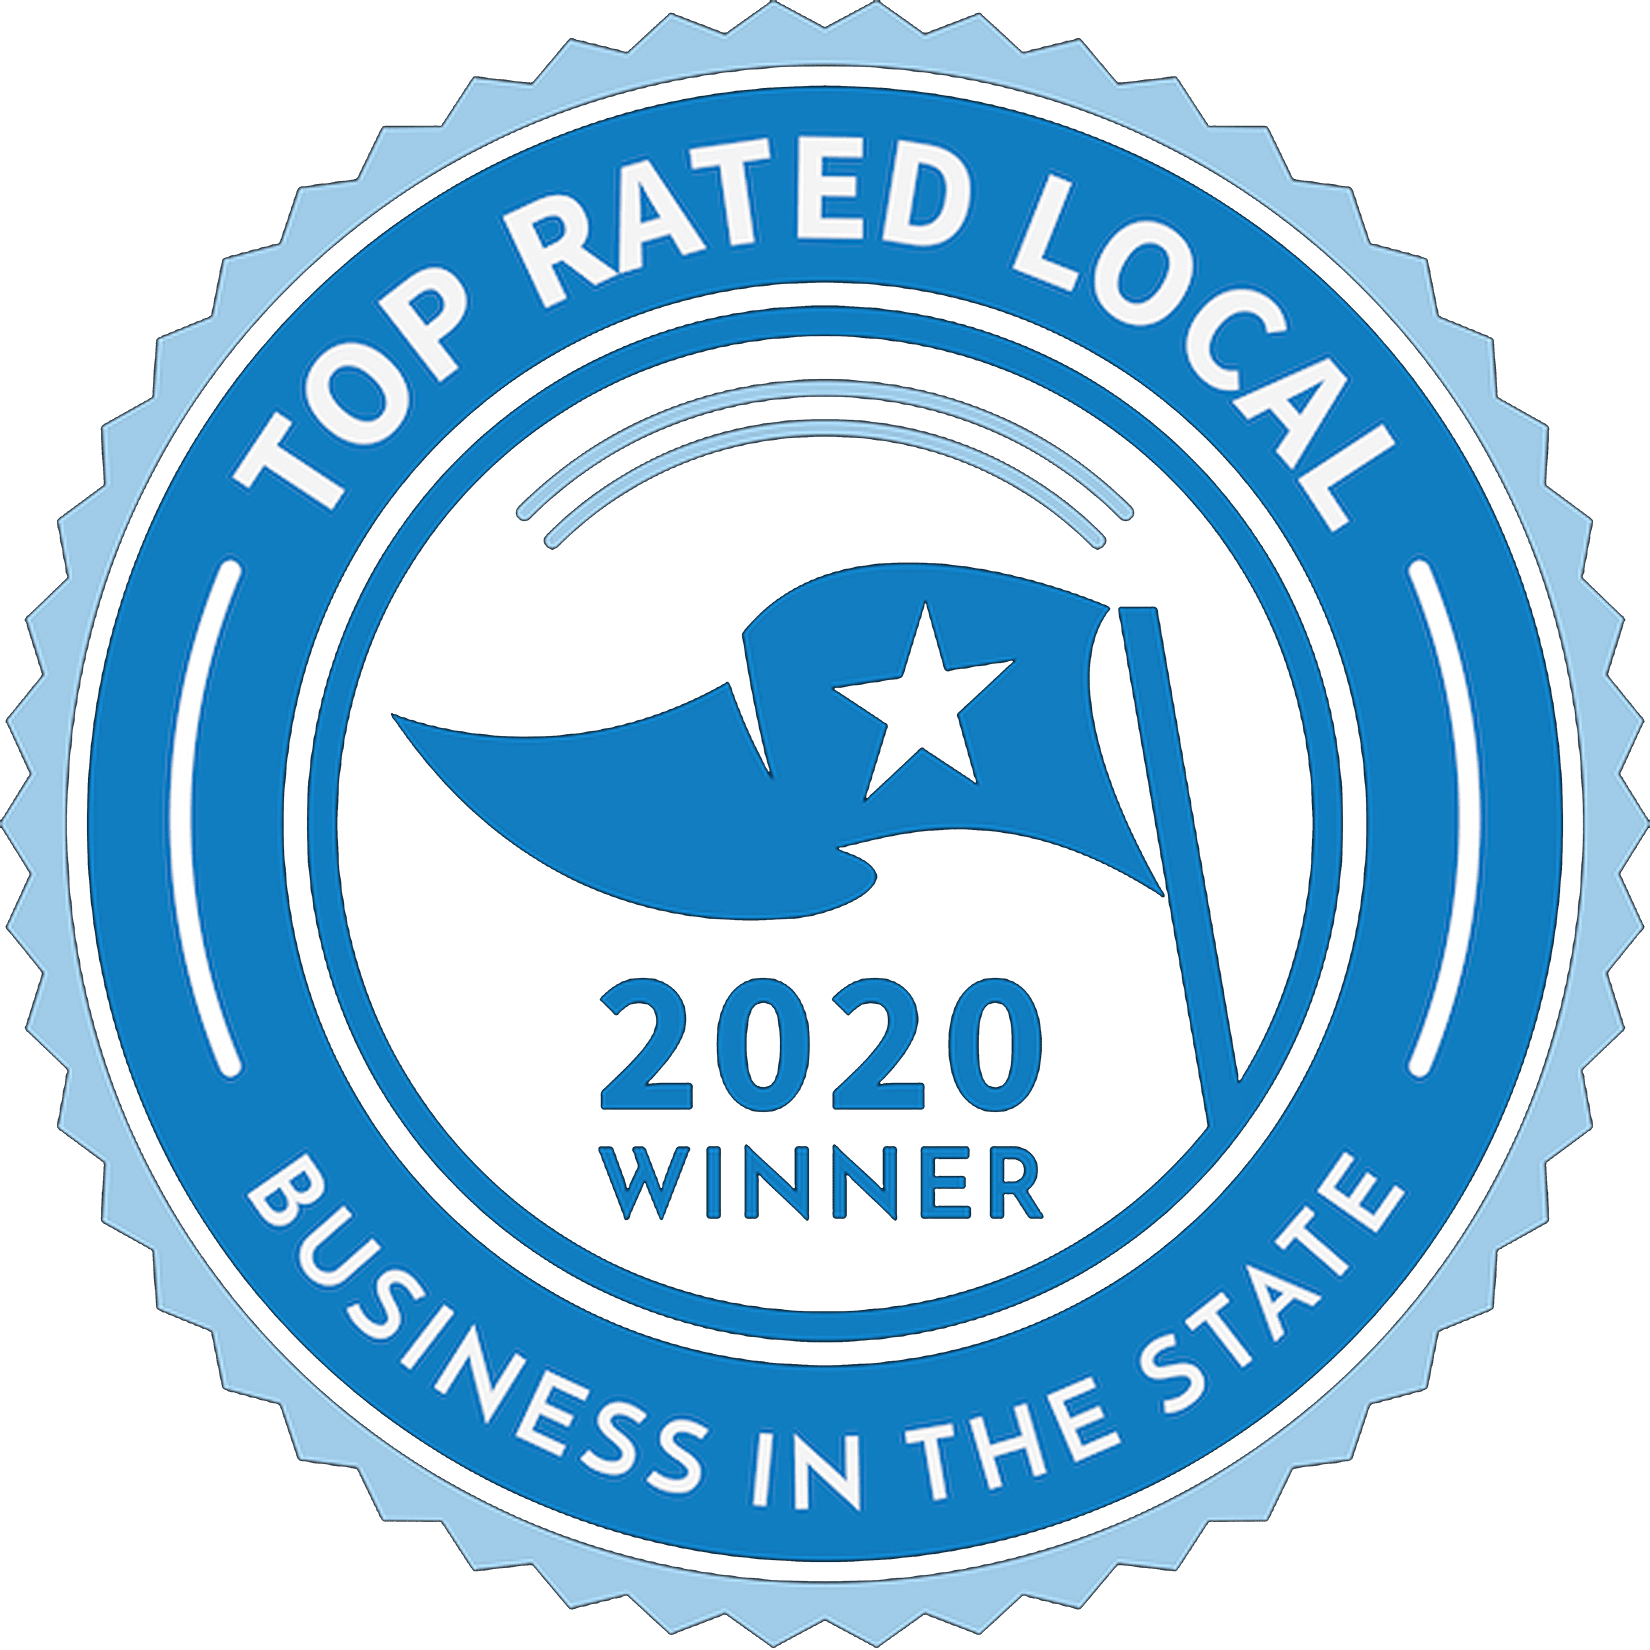 Top Rated Local 2020 Winner Logo